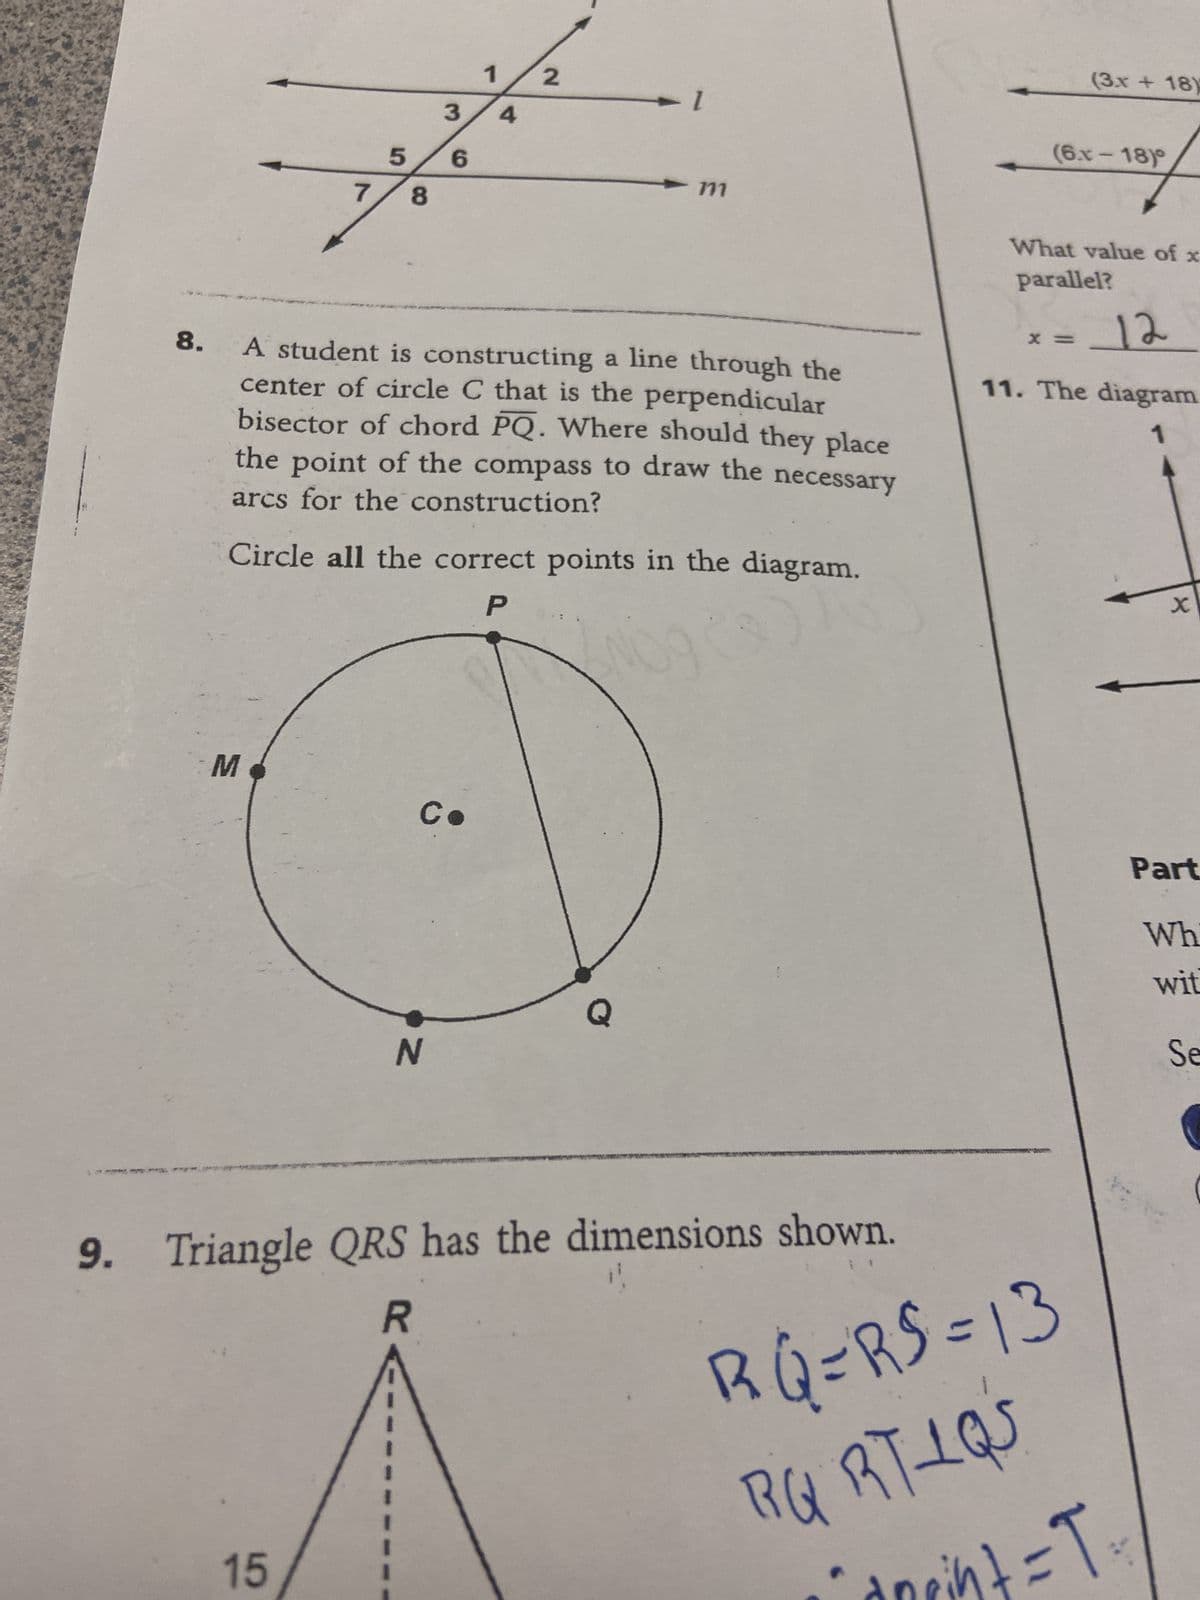 7
M
5
8
15
3
6
N
1
Co
4
8. A student is constructing a line through the
center of circle C that is the perpendicular
bisector of chord PQ. Where should they place
the point of the compass to draw the necessary
arcs for the construction?
2
Circle all the correct points in the diagram.
P
► 1
711
Q
9. Triangle QRS has the dimensions shown.
R
(3x + 18)
What value of x
parallel?
X
(6.x-18)
= 12
11. The diagram
RQ=RS=13
RG RTLQS
pint = T₁
x
Part
Wh
wit
Se